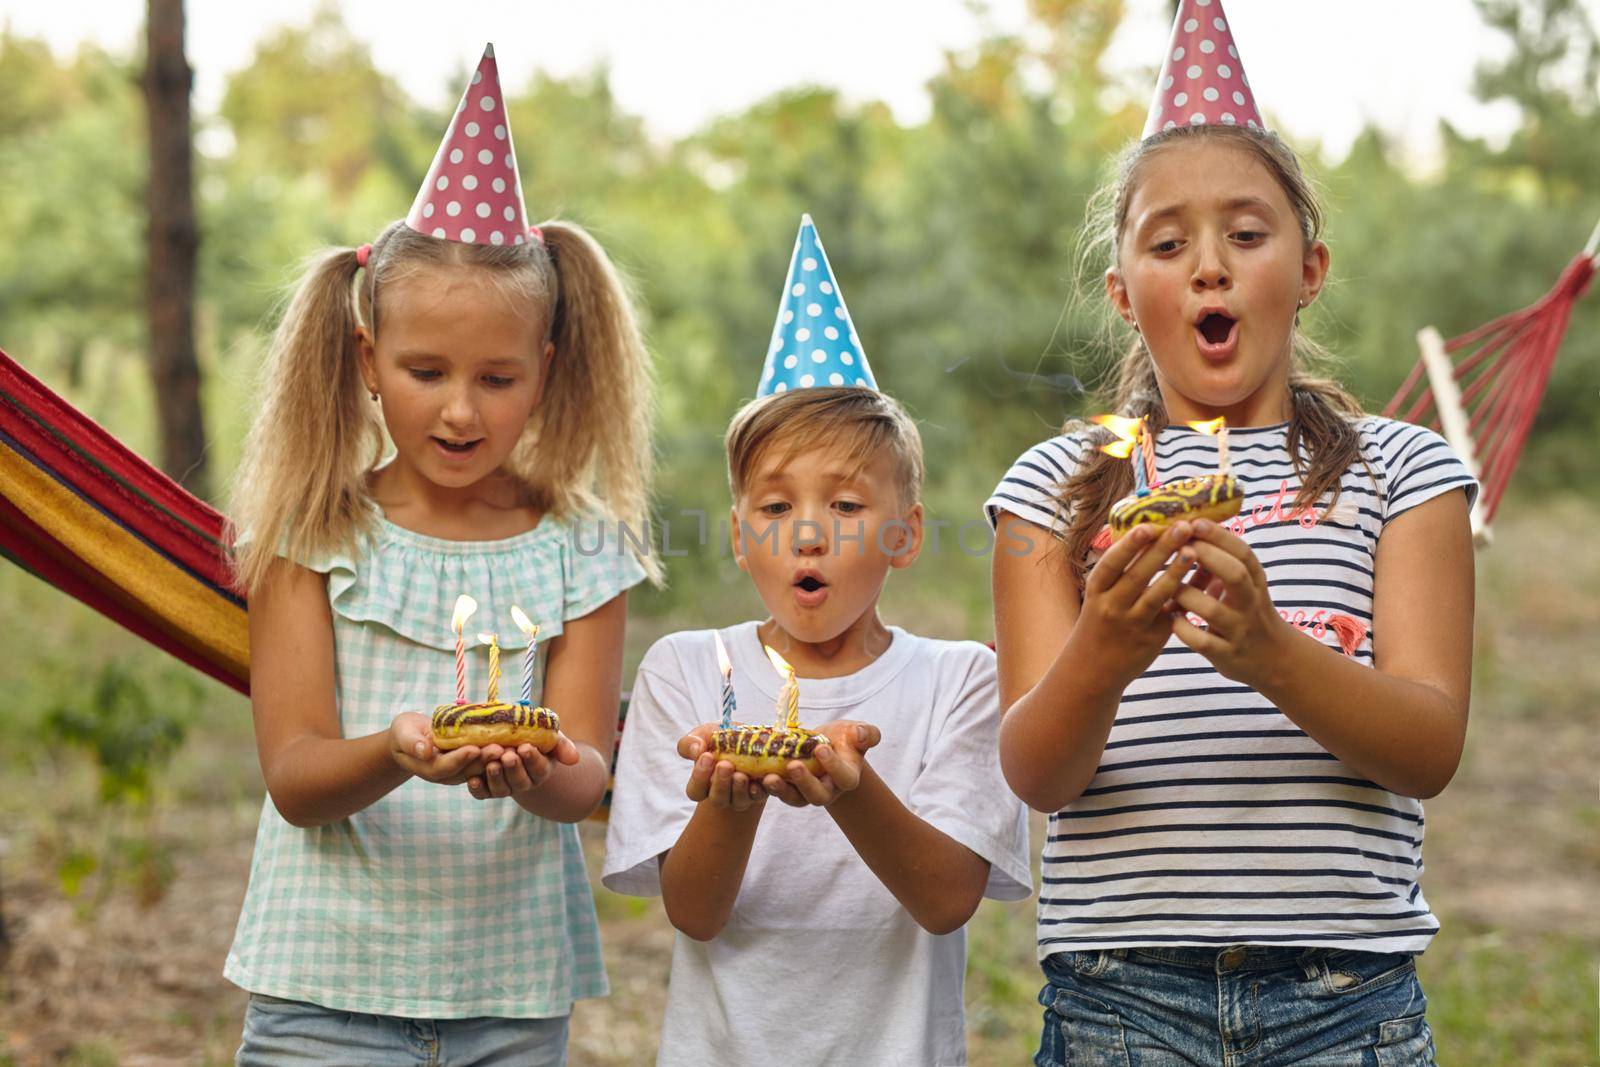 Children blow candles on birthday cake. Kids party decoration and food. Boy and girls celebrating birthday in the garden with hammock. Kids with sweets.